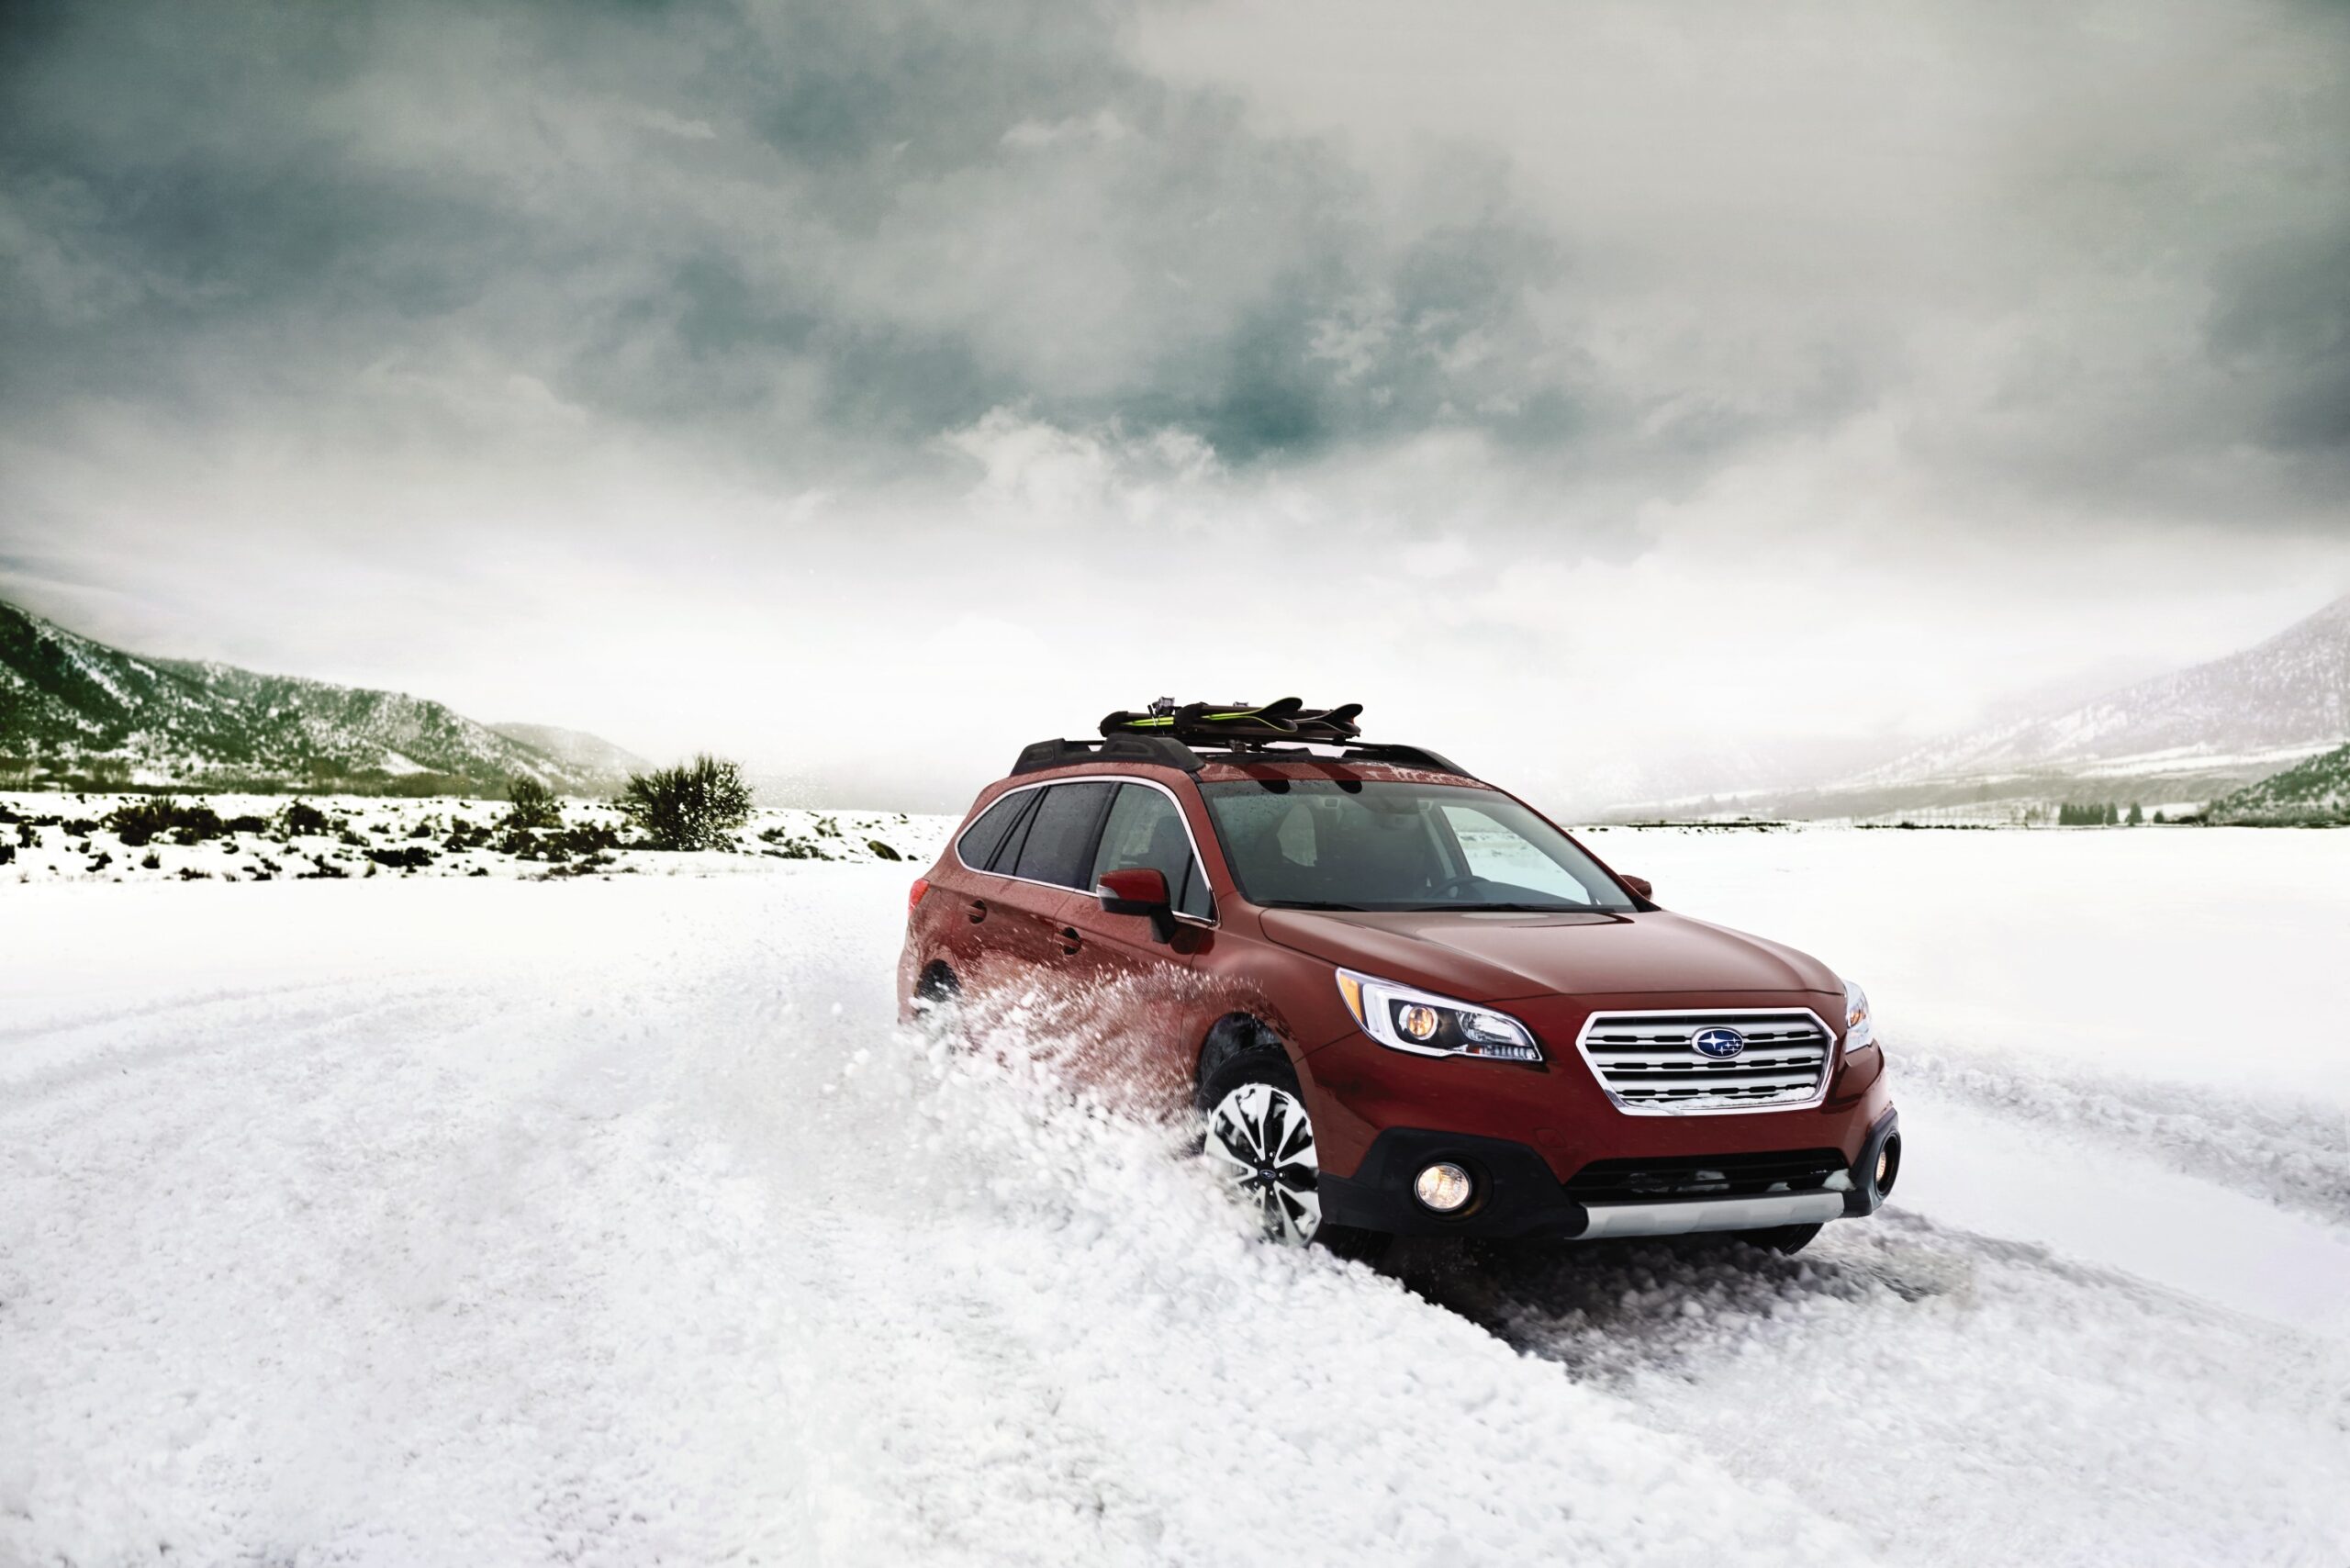 Go Play in the Snow with Subaru.